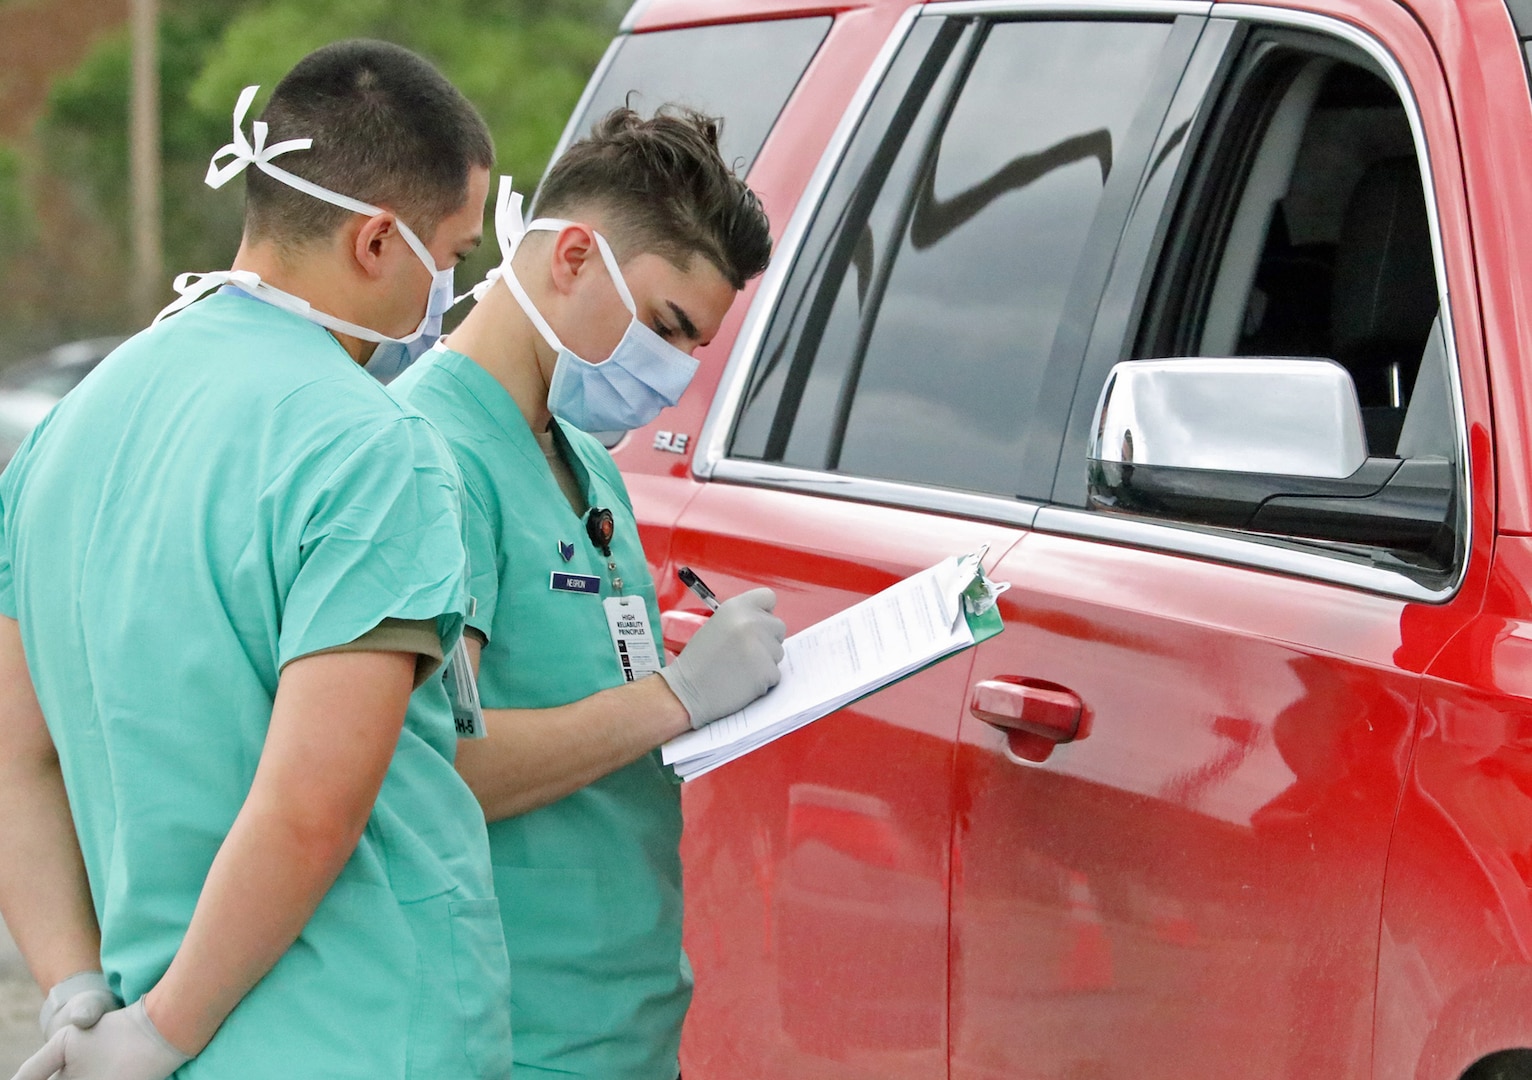 Senior Airman Robert Wolshlager (left) and Senior Airman Christian Negrón (right) conduct drive-thru COVID-19 screening at Brooke Army Medical Center's designated screening area March 17.